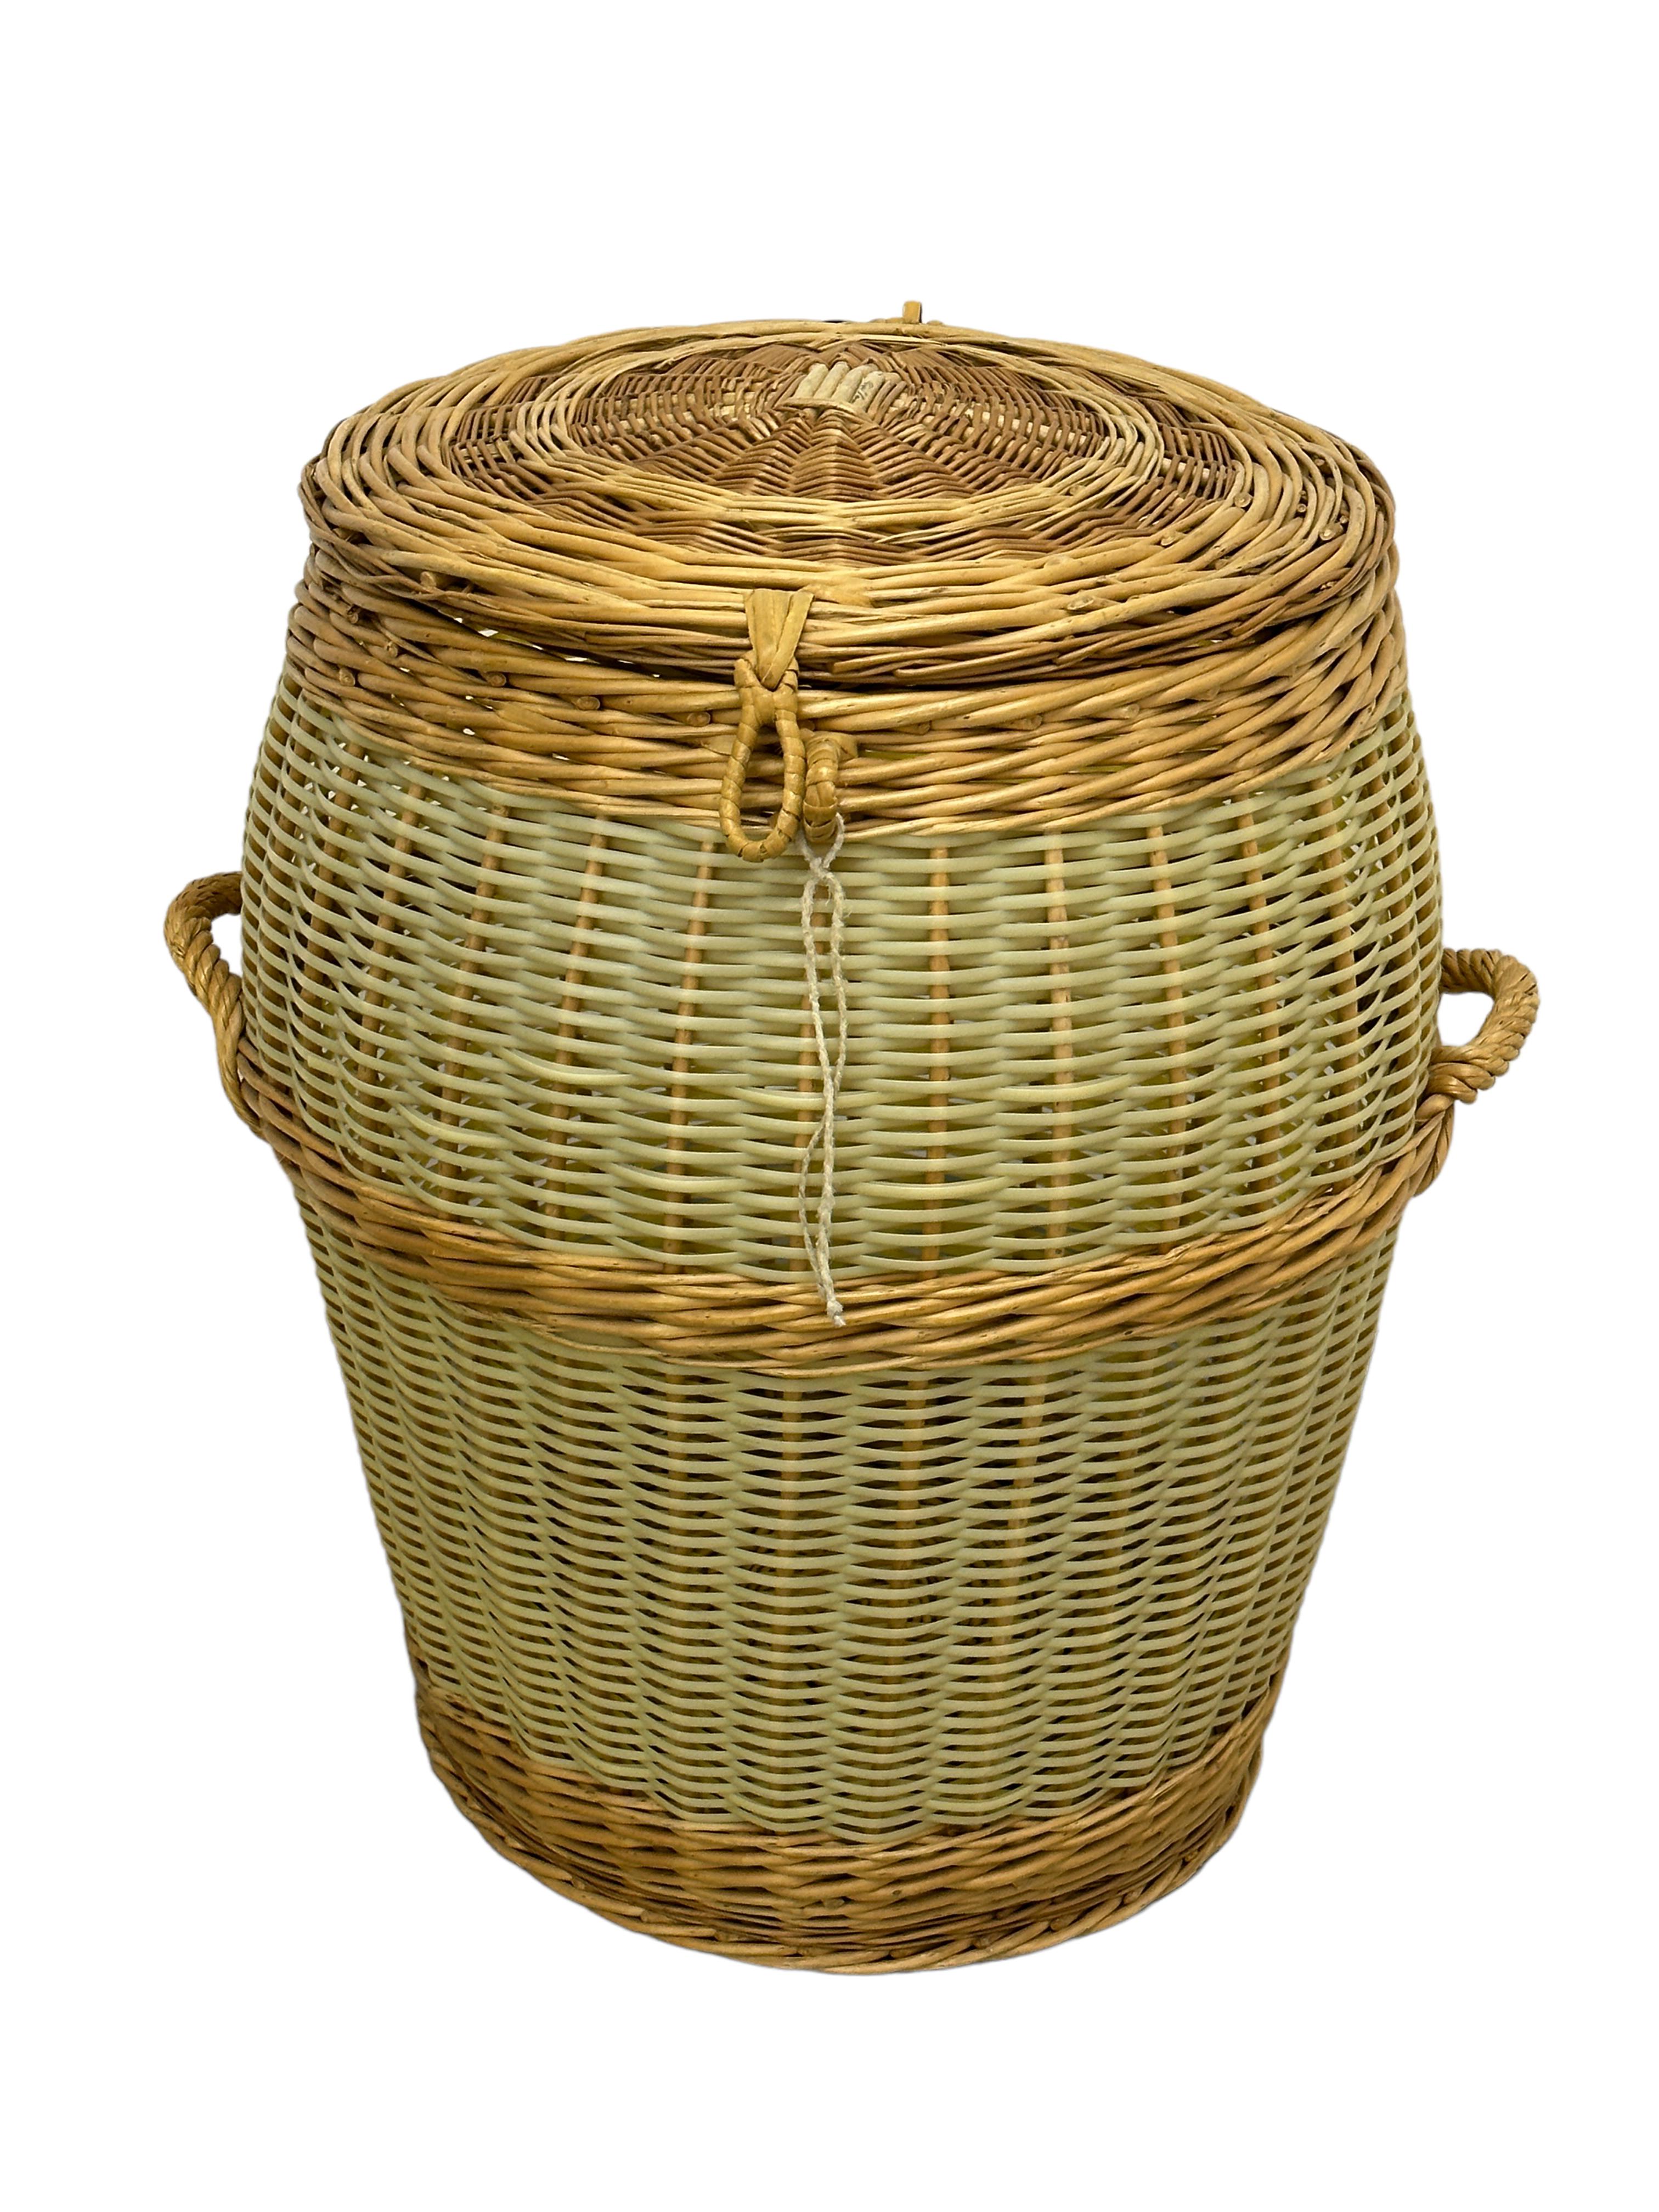 Offered is an absolutely stunning large 1970s vintage wicker and plastic laundry basket hamper with lid and wicker handles. Overall very good vintage condition with light ware consistent with age and use. A nice addition to any room. You can also